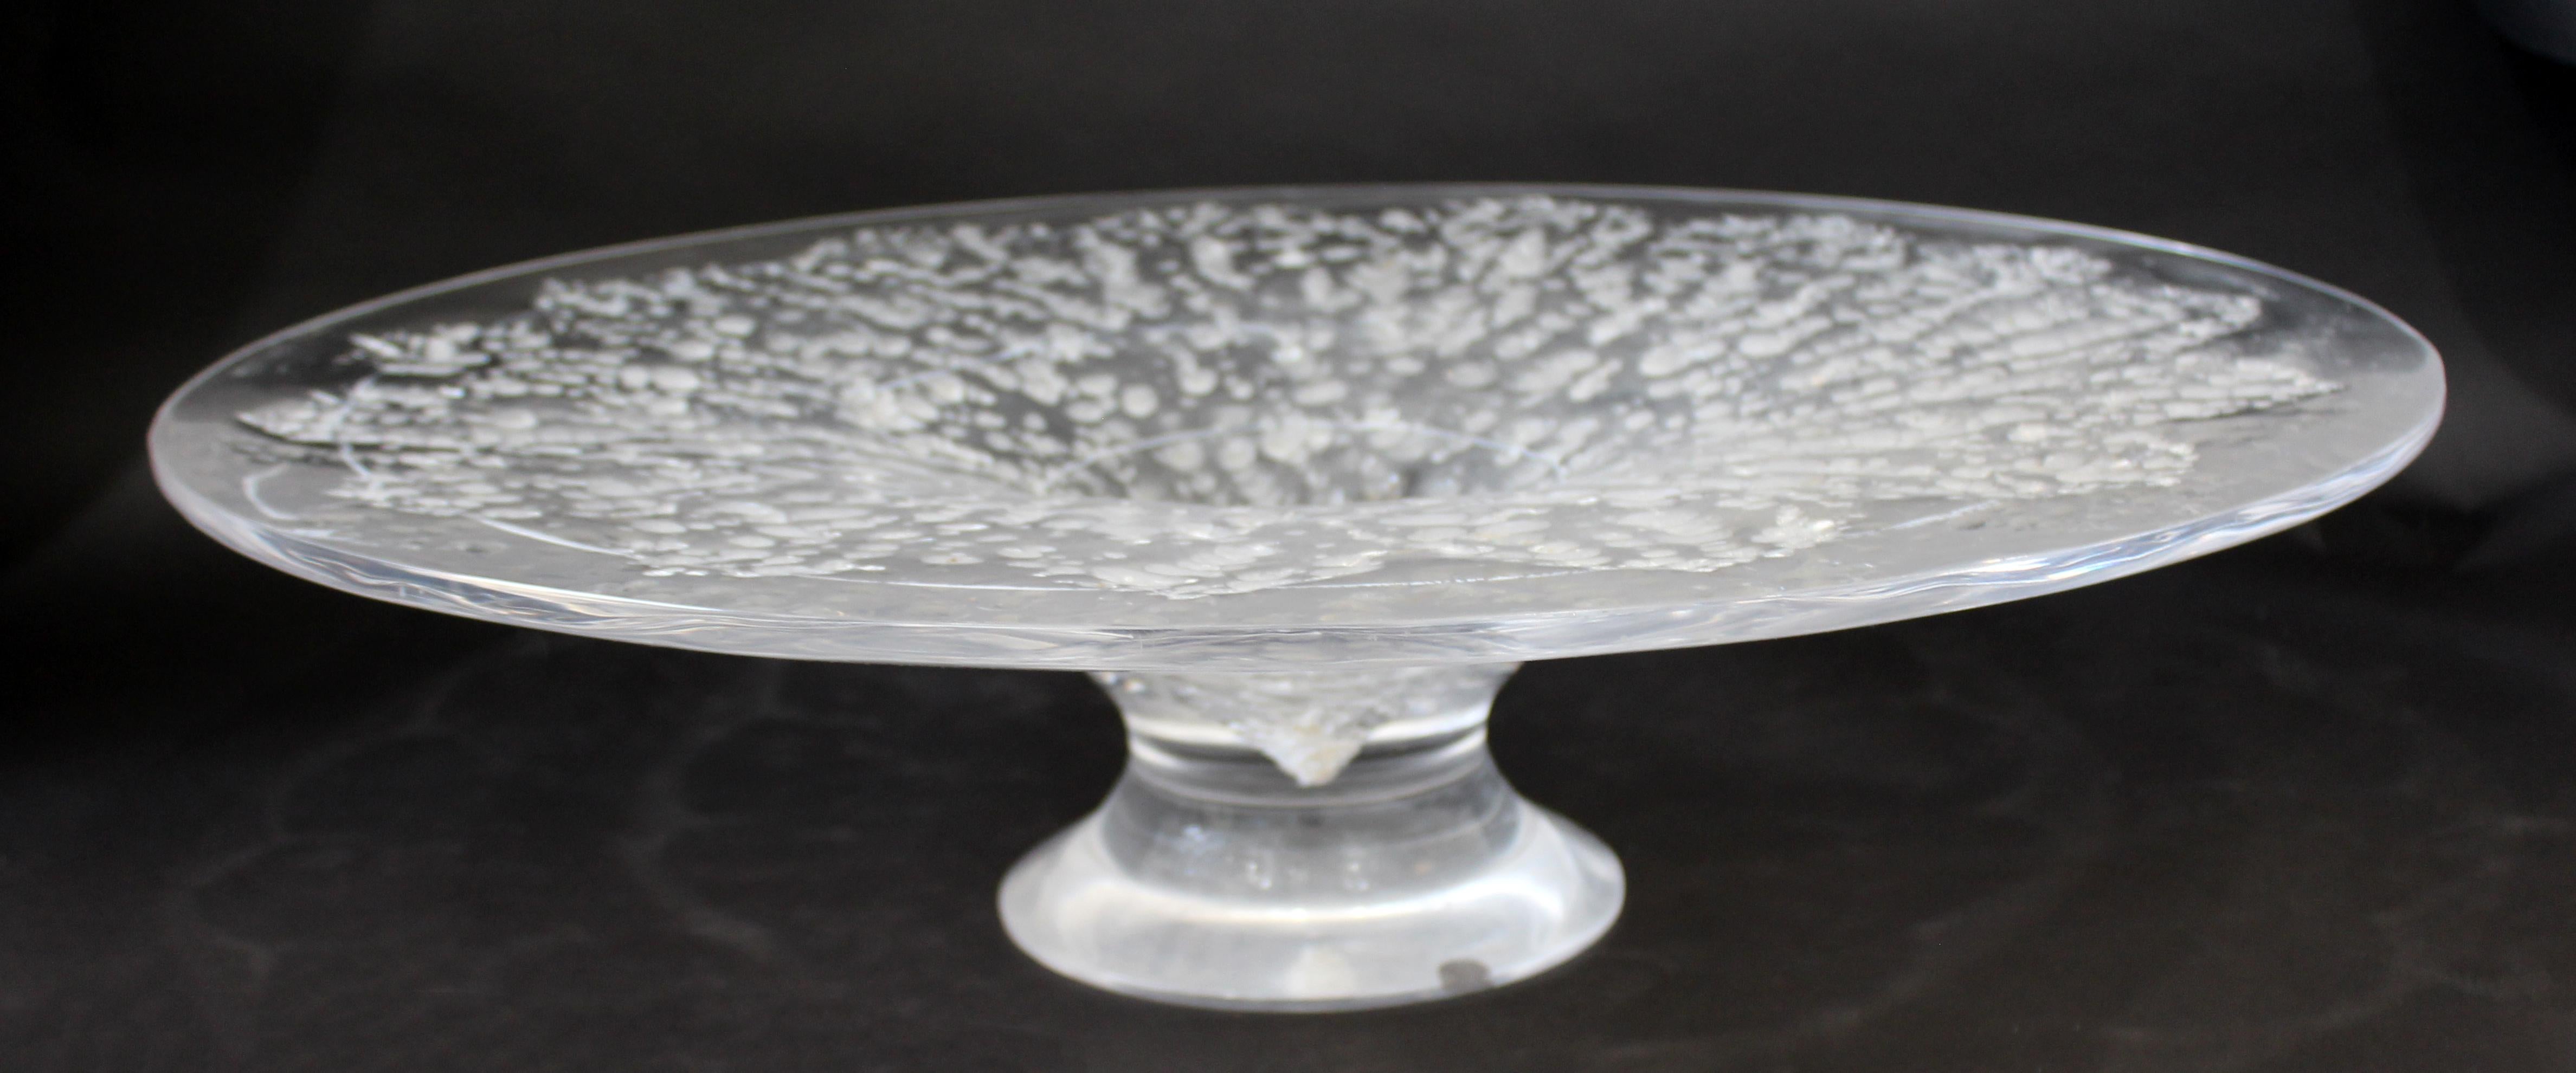 Contemporary Modern Lucite Pedestal Bowl Table Sculpture Signed Tery Belle 1990s In Good Condition In Keego Harbor, MI